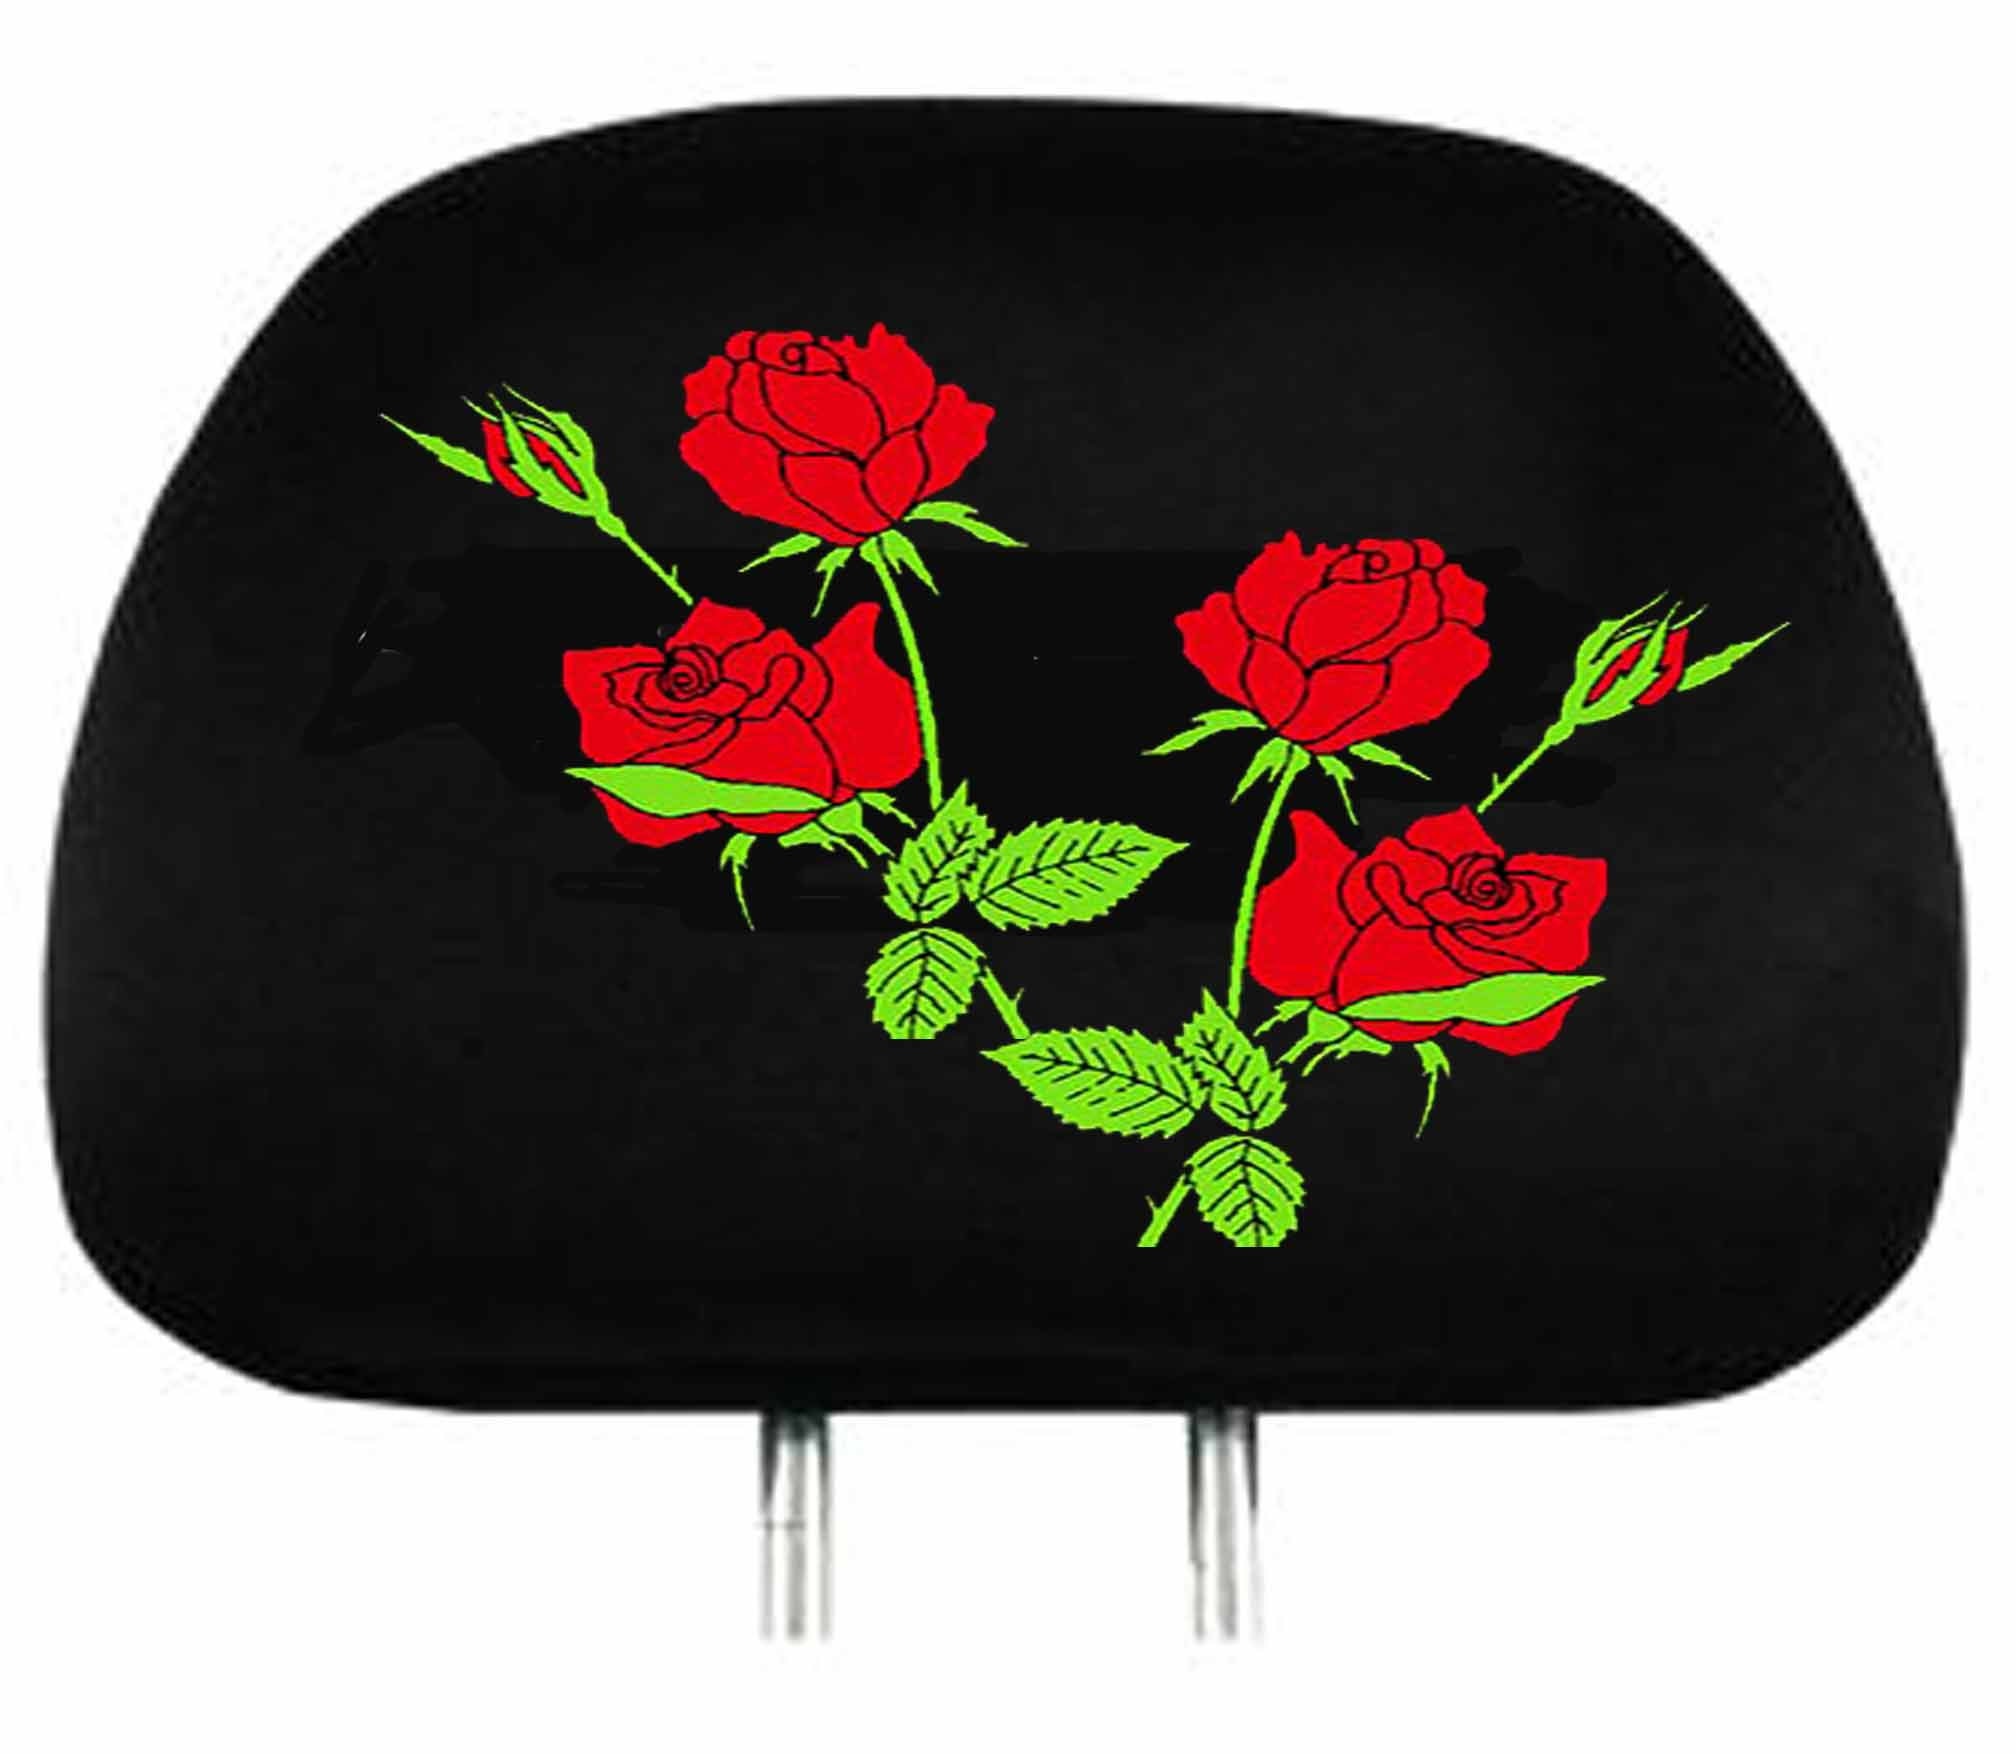 Roses  headrest Covers set  ( 2 ) Nice velour headrest covers with a design of red roses. Choose color for headrest